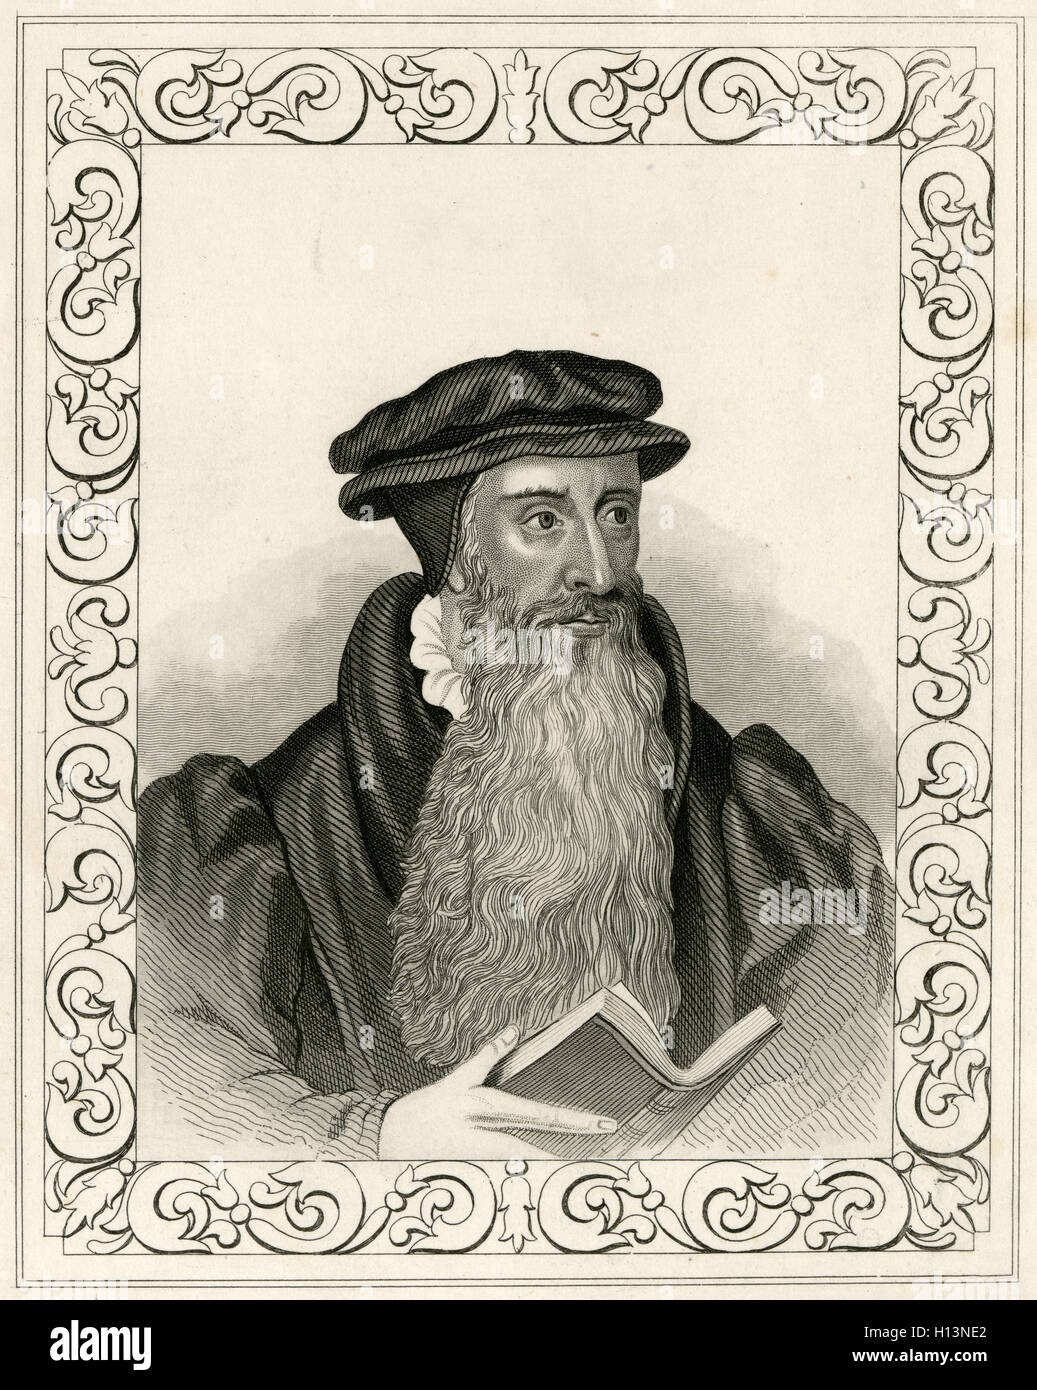 Antique c1850 engraving, John Knox. John Knox (1513-1572) was a Scottish minister, theologian, and writer who was a leader of the Reformation and is considered the founder of the Presbyterian Church of Scotland. SOURCE: ORIGINAL ENGRAVING. Stock Photo